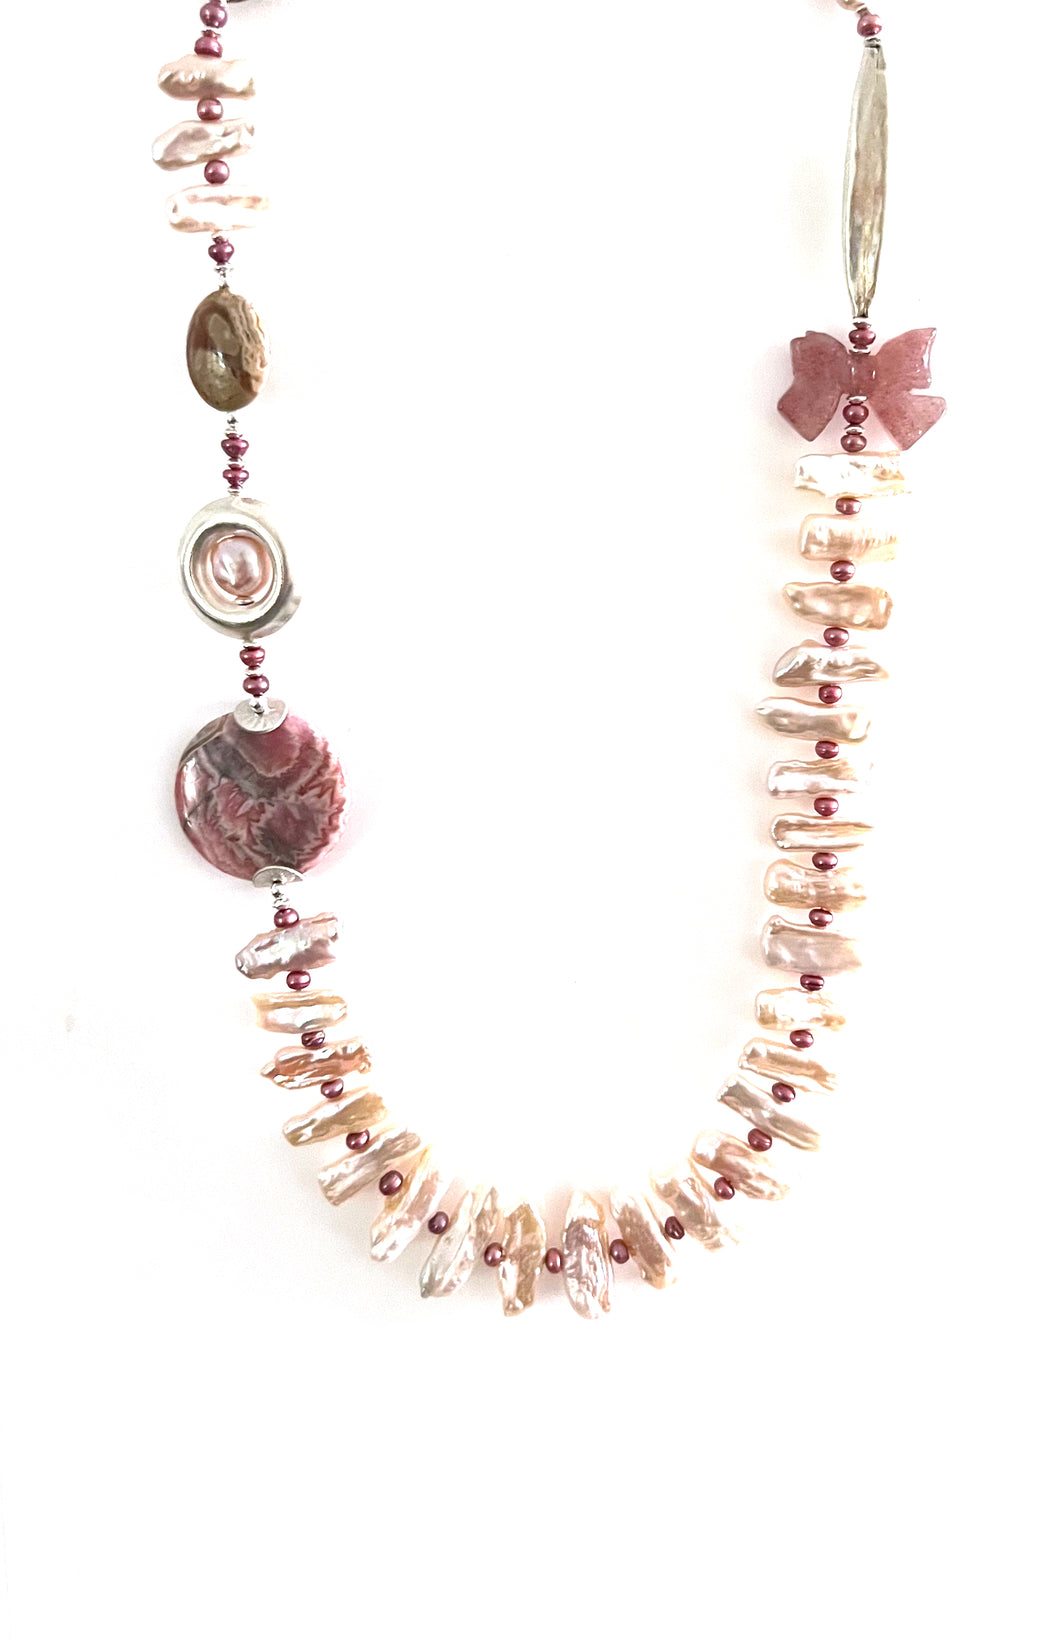 Australian Handmade Necklace with Pink Pearls Rhodochrosite and Sterling Silver